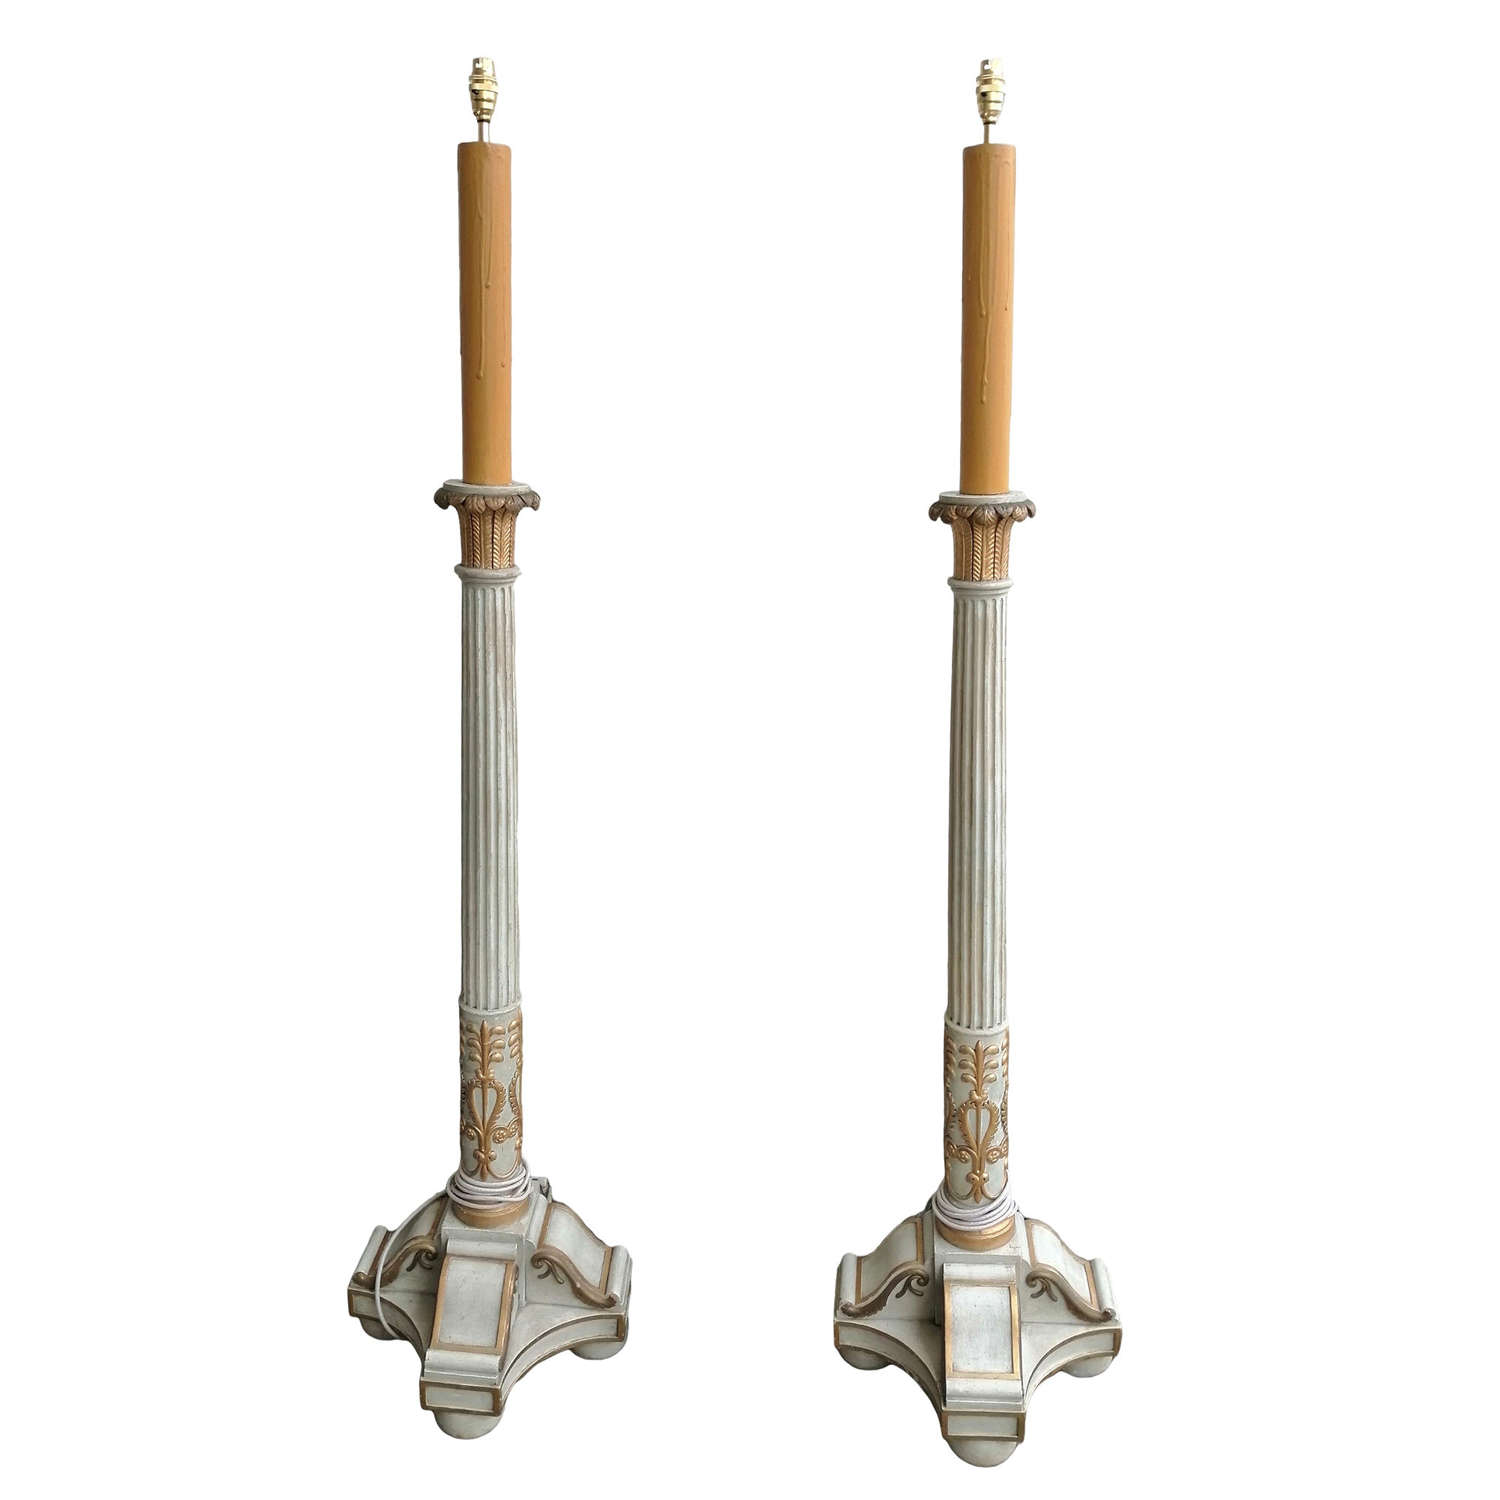 A stunning pair of 19th century French painted standard lamps